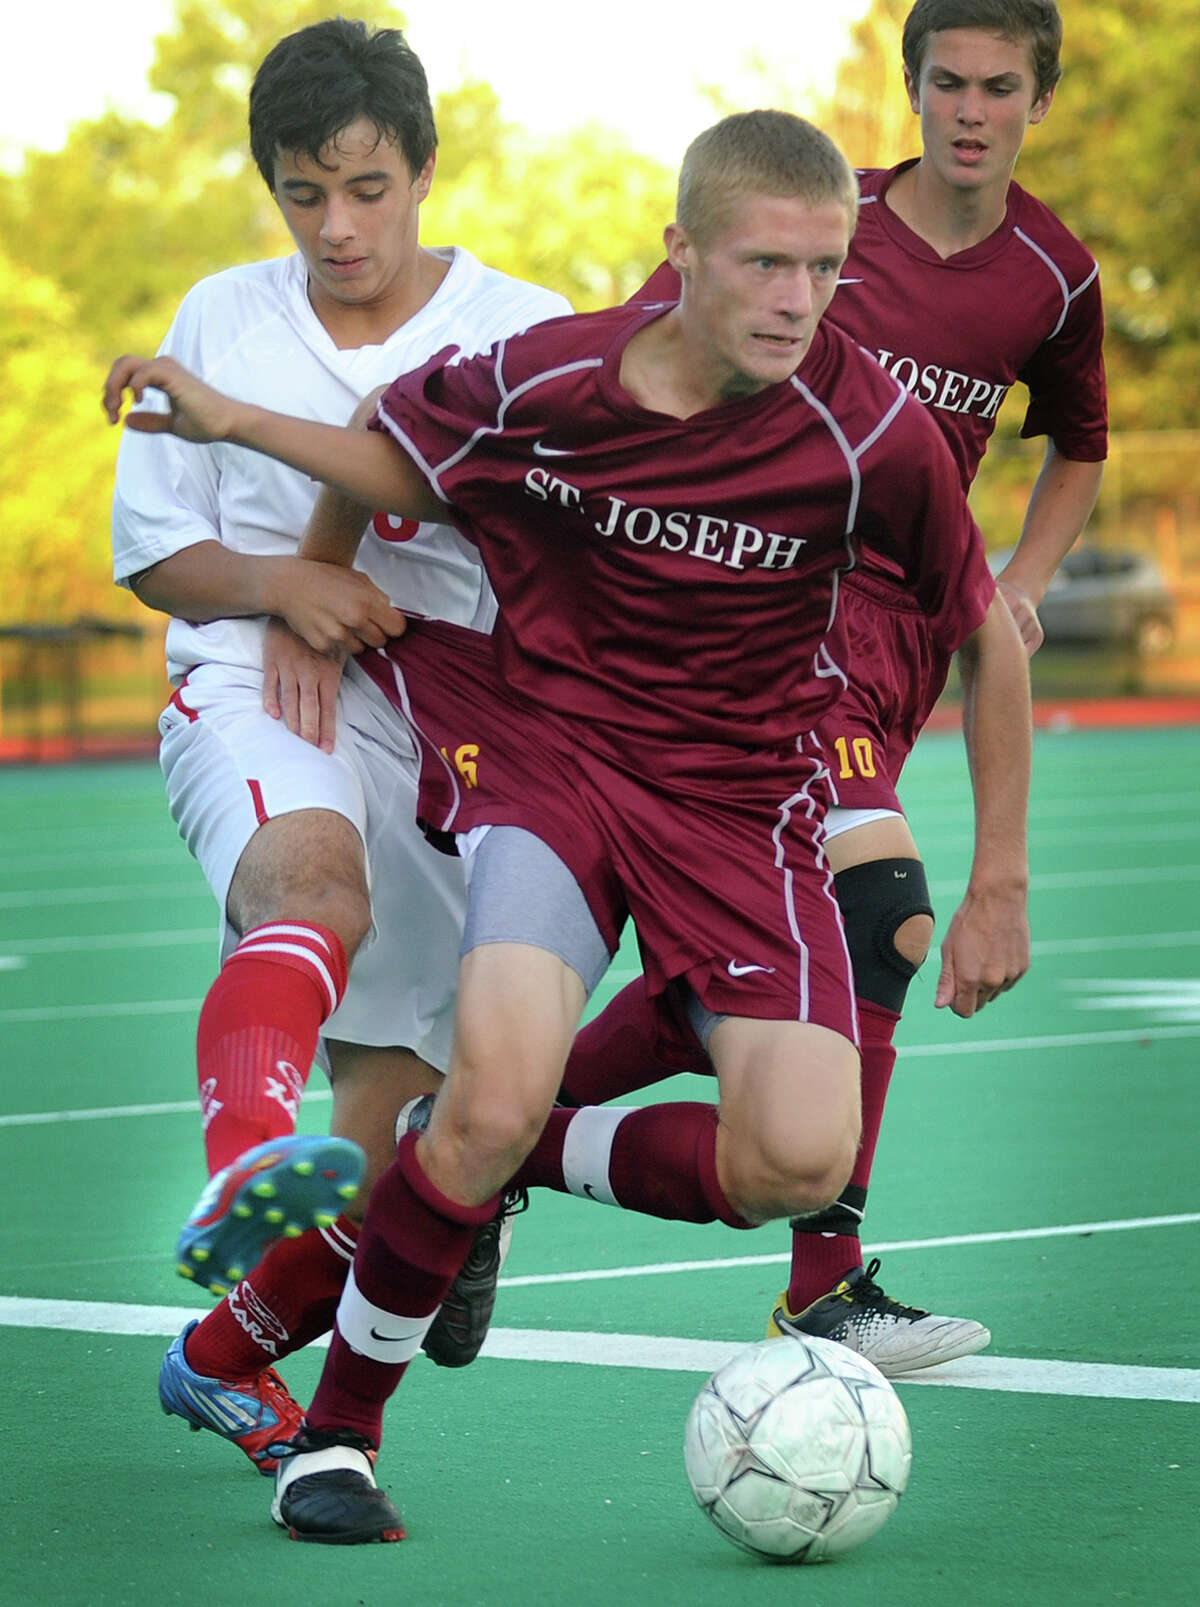 Central's Juan Arango, left, grabs hold of the uniform of St. Joseph's Sean Martino as he pursues the ball during their matchup at Central High School in Bridgeport on Monday, October 1, 2012.